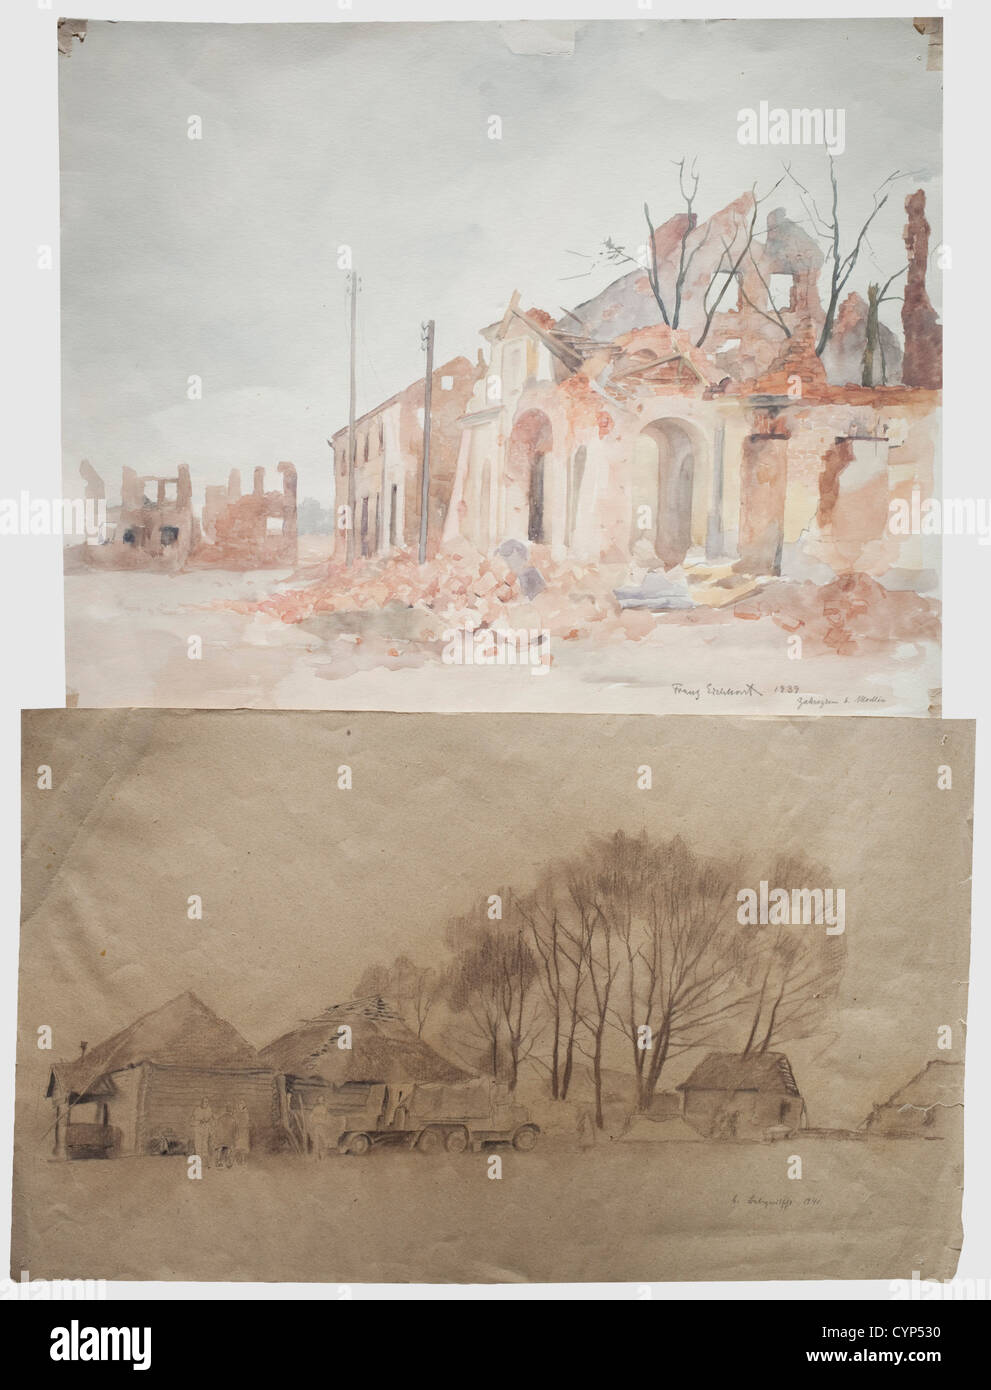 Franz Eichhorst(1885 - 1948)- twelve watercolours and drawings,Watercolour on cardboard depicting destroyed houses in Zakroczym,Poland. Signed,dated,and titled on the lower right 'Franz Eichhorst 1939,Zakrokczym b. Modlin'. The corners with slight remains of glue. 31.5 x 38 cm. The other paintings portraying scenes from the Russian Campaign,a watercolour of a destroyed Russian tank with detailed size specifications,one of a burning town,one titled 'Minsk',fighting near Stalingrad,German soldiers in a Russian village,studies,a monastery,and a dest,Additional-Rights-Clearences-Not Available Stock Photo